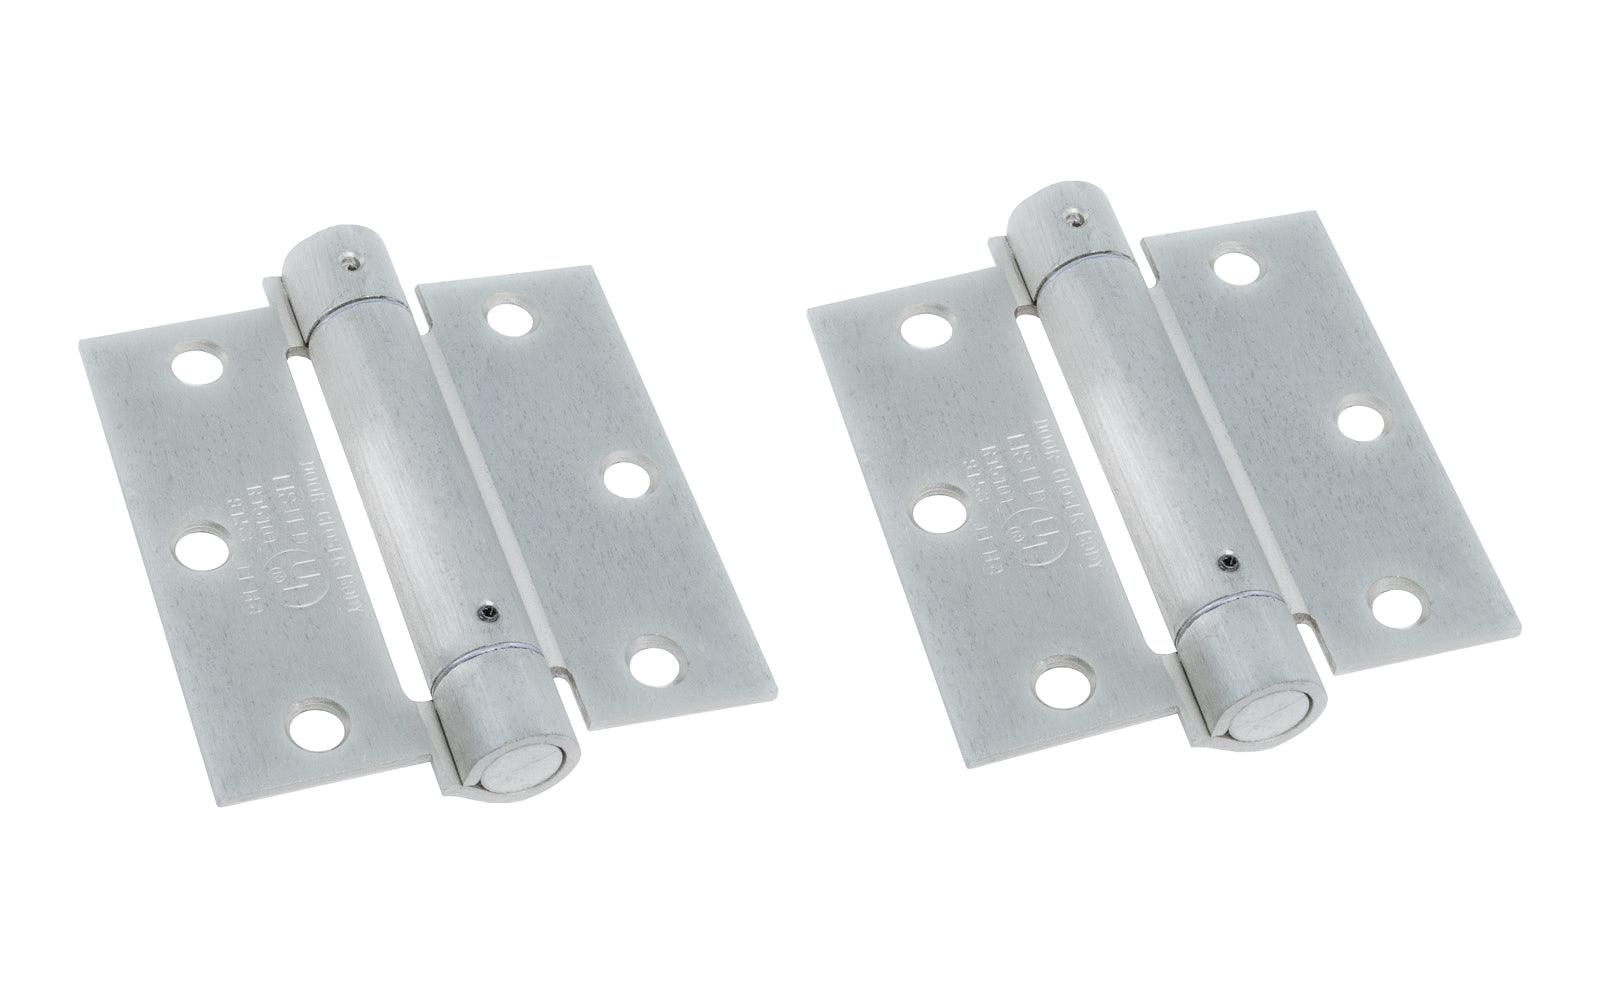 These 3-1/2" Satin Chrome Finish Spring Hinges are designed for hanging self-closing doors in basements, stairways, garages, & entrances, etc. Can be used in residential, commercial, & apartment buildings. Hinge is UL approved. Closing speed is adjustable. Fits standard hinge cutout. Square corner automatic door-closing spring hinge. Satin Chrome Finish on cold-rolled steel material. Sold as two hinges in pack.  Ultra Hardware No. 35336